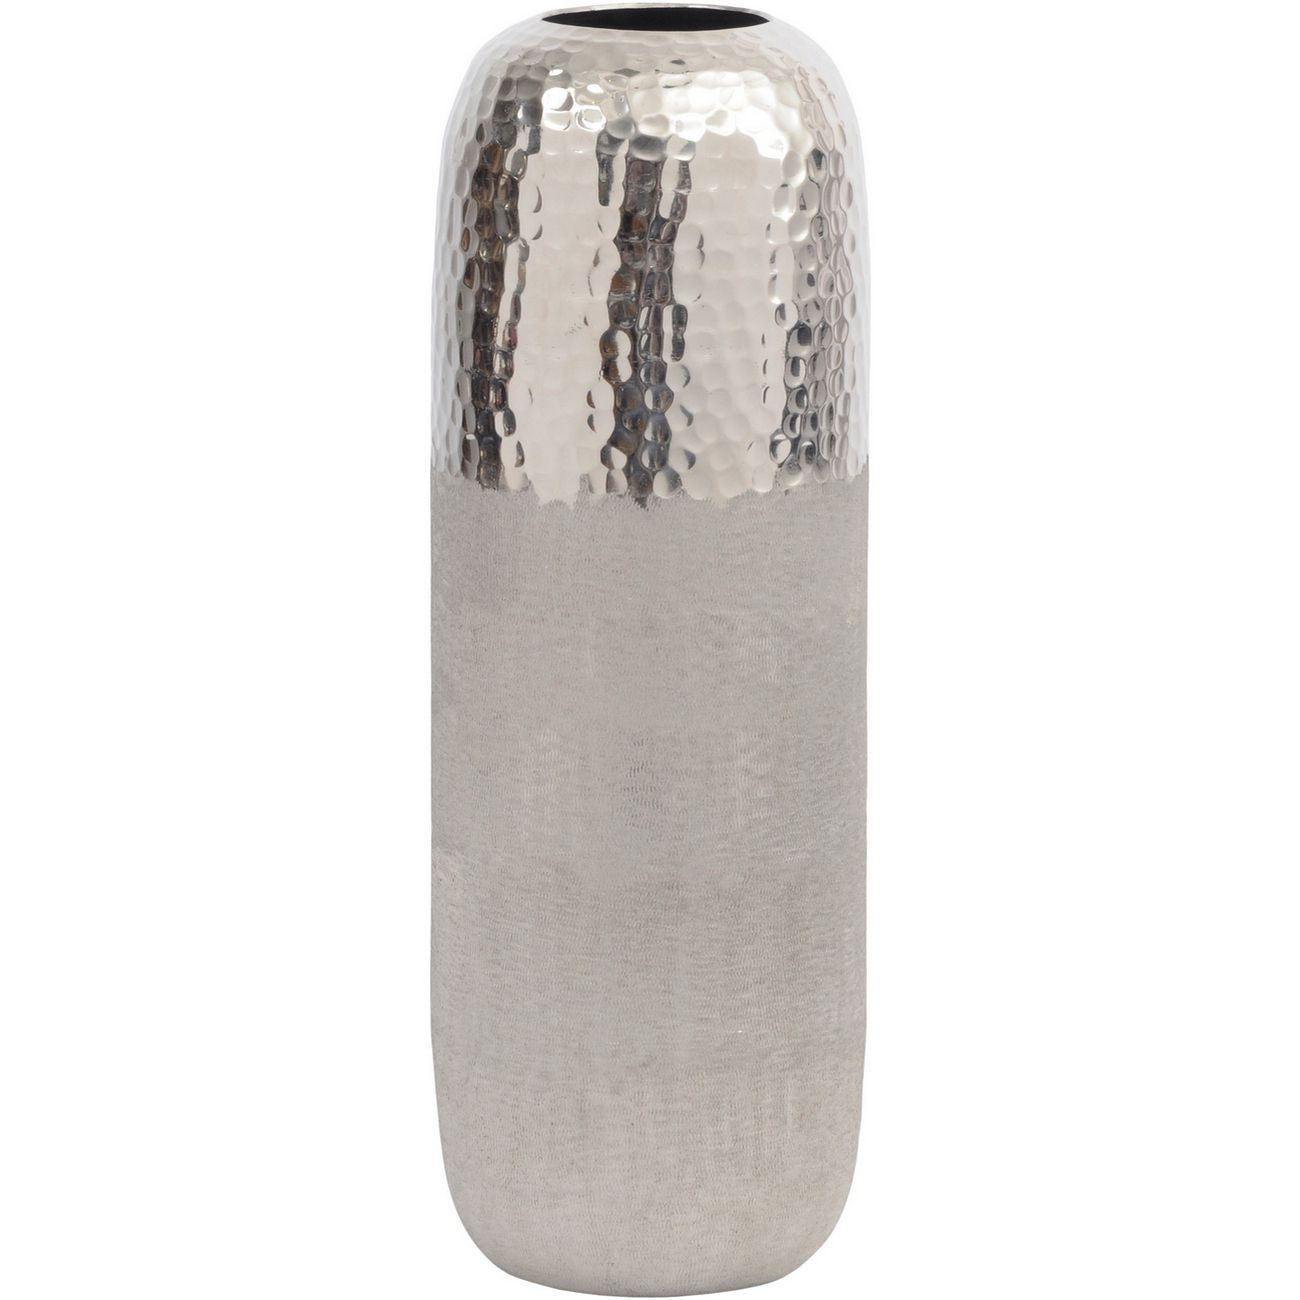 Fuse Hammered and Brushed Large Vase in Silver Finish